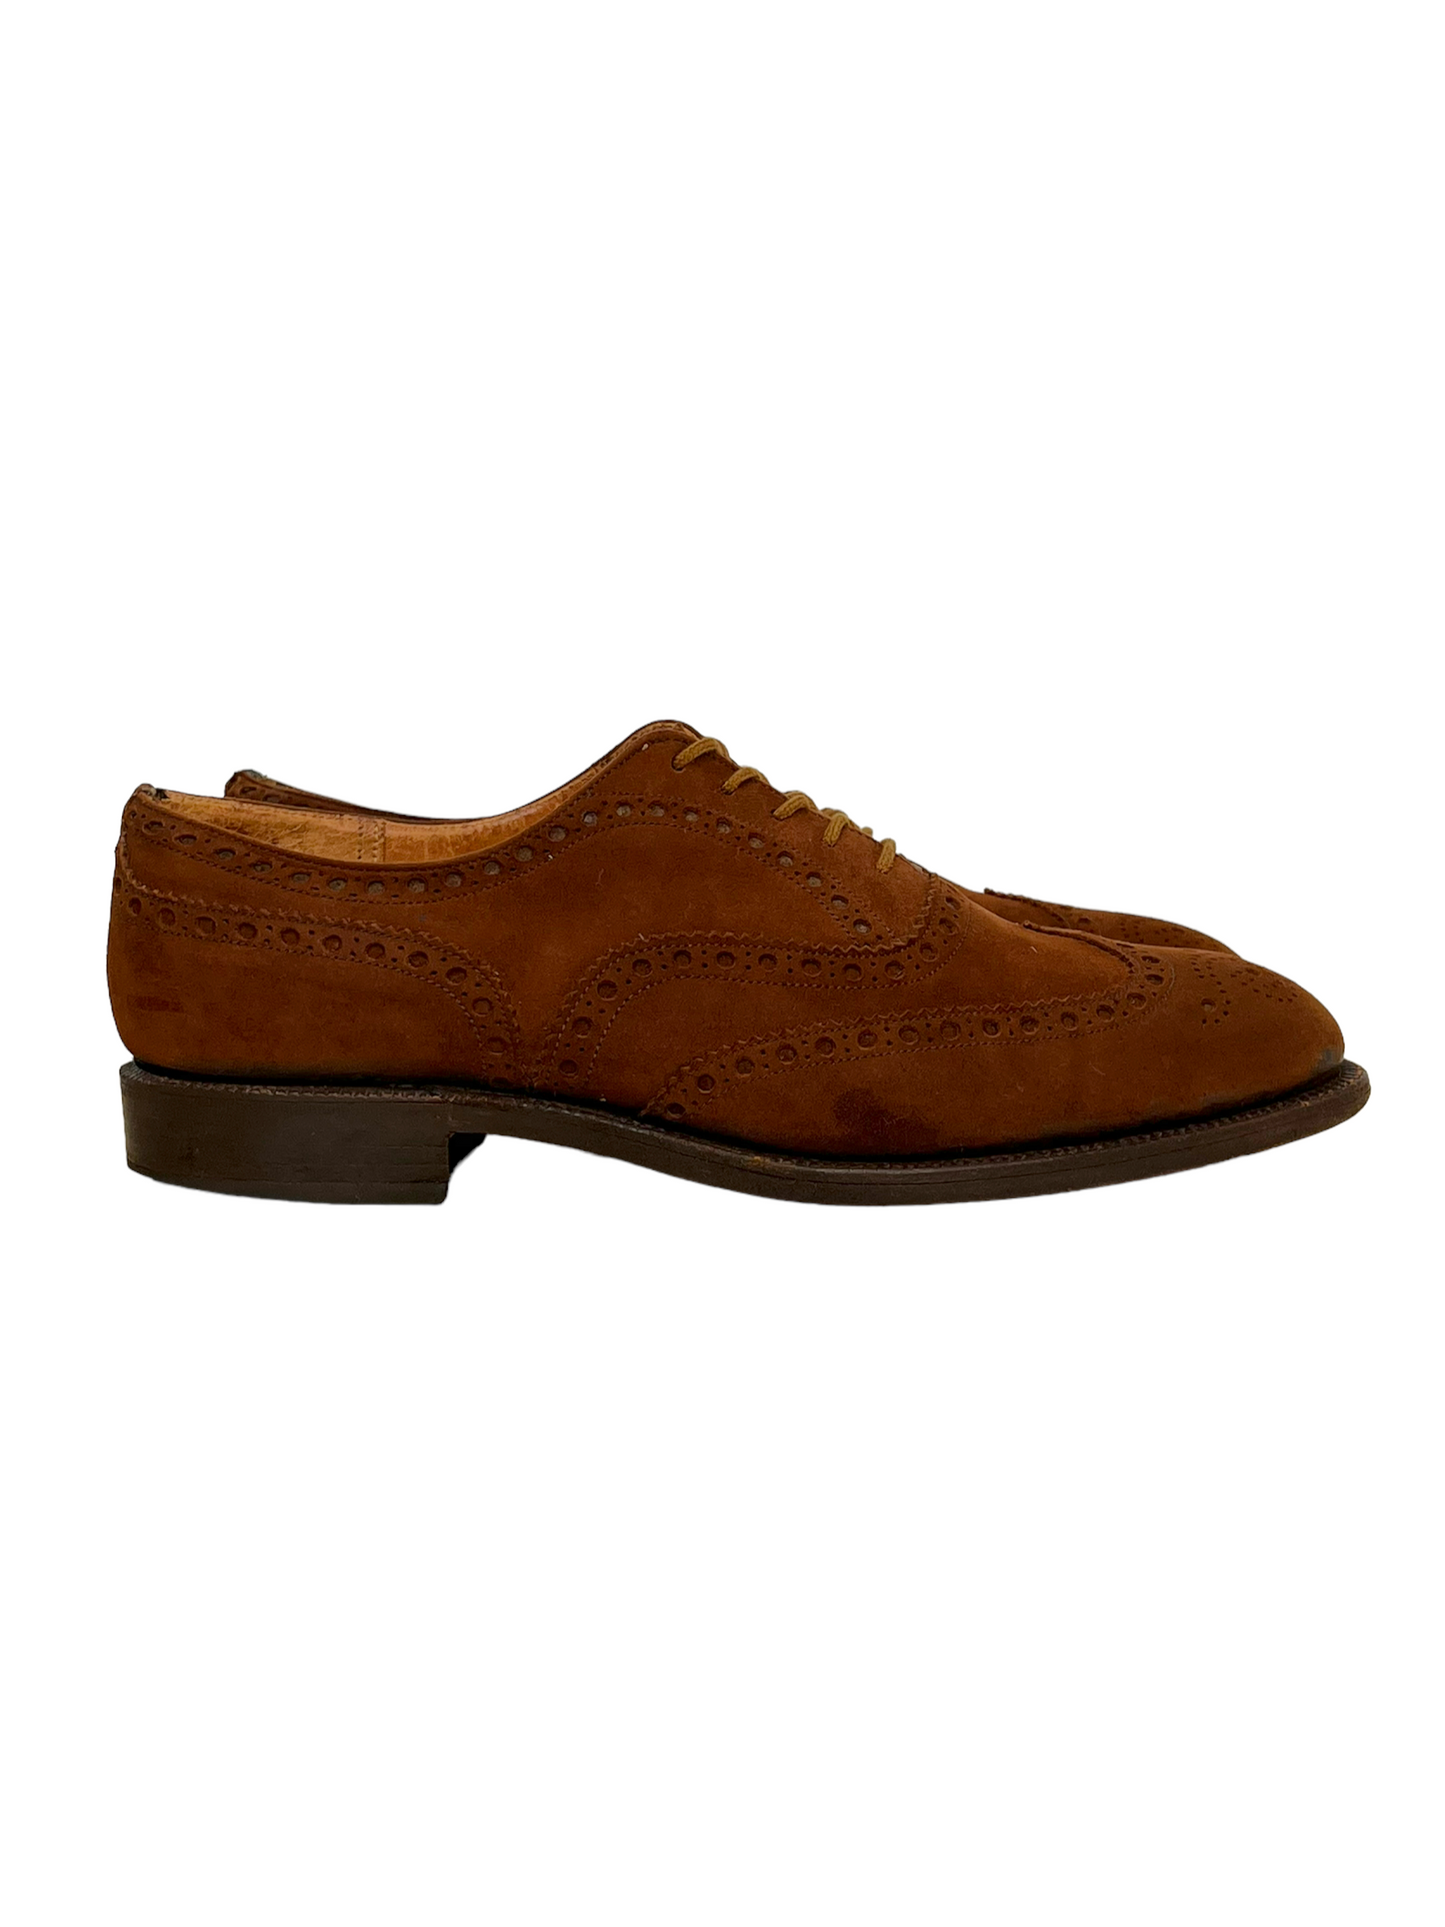 Church's Brown Suede Chetwynd Oxford Brogues Shoes - Genuine Design Luxury Consignment for Men. New & Pre-Owned Clothing, Shoes, & Accessories. Calgary, Canada